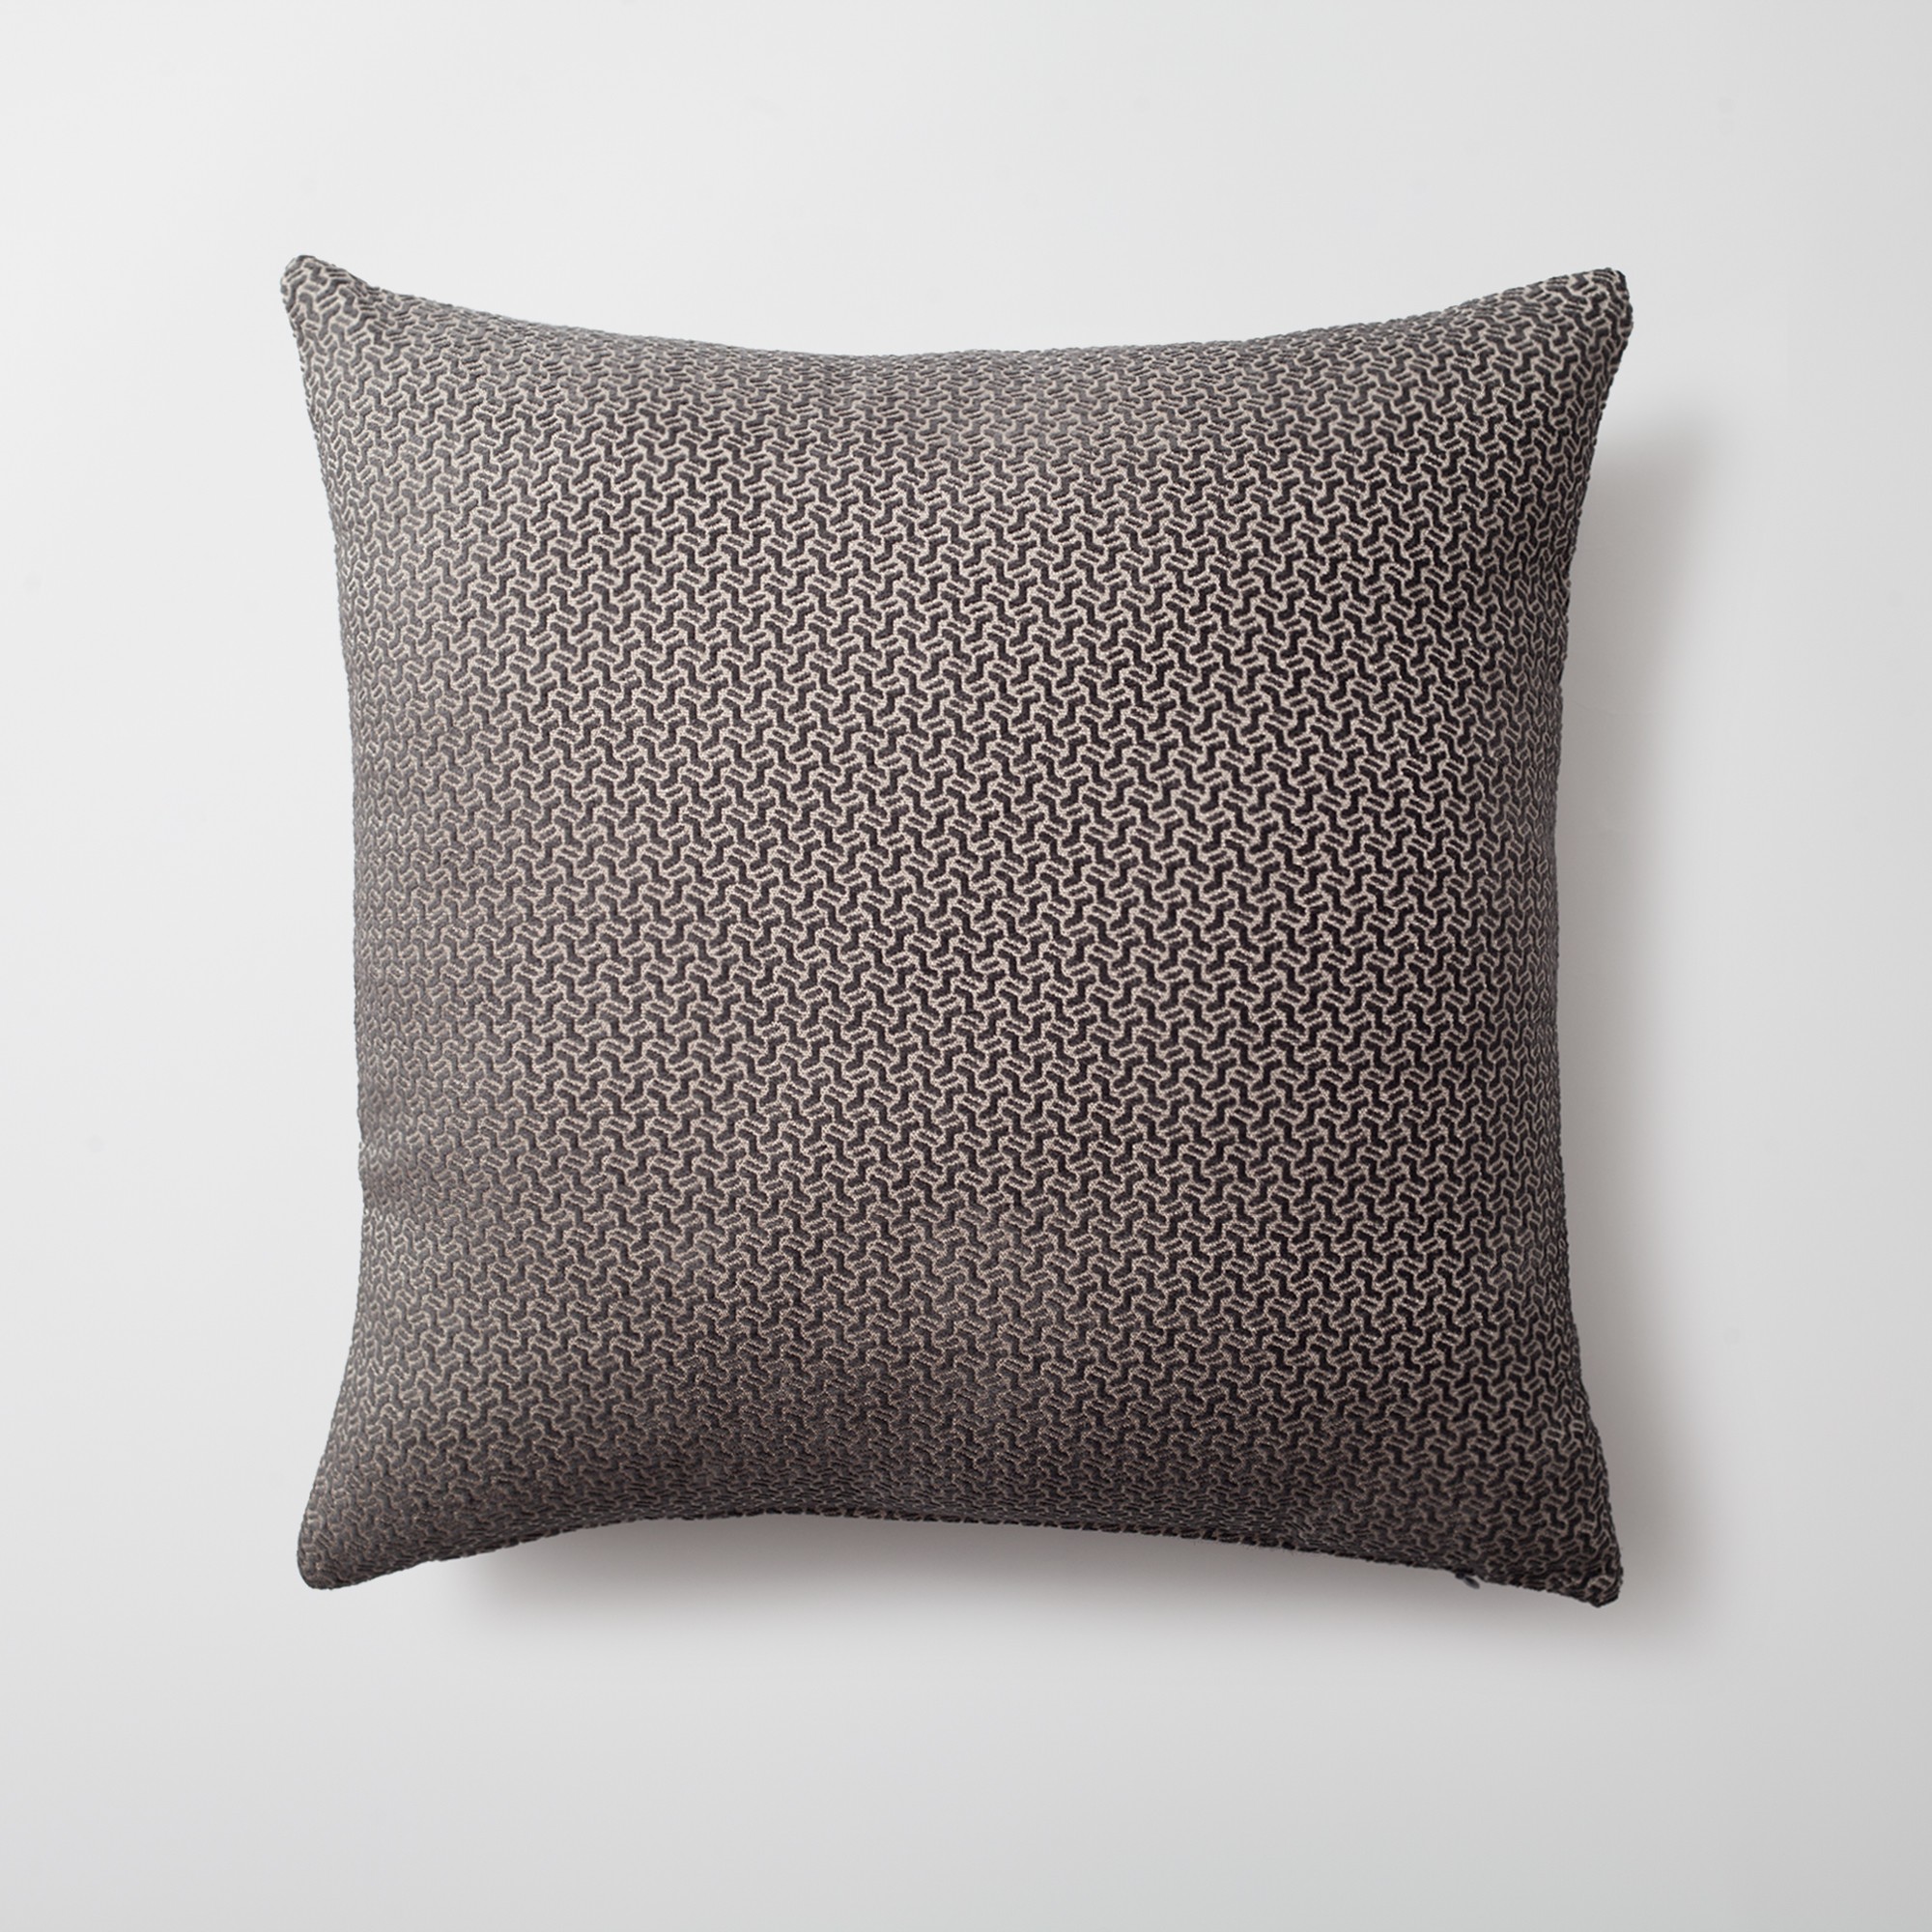 "Arte" - Geometric Patterned 20x20 Inch Cushion - Anthracite (Cover Only)